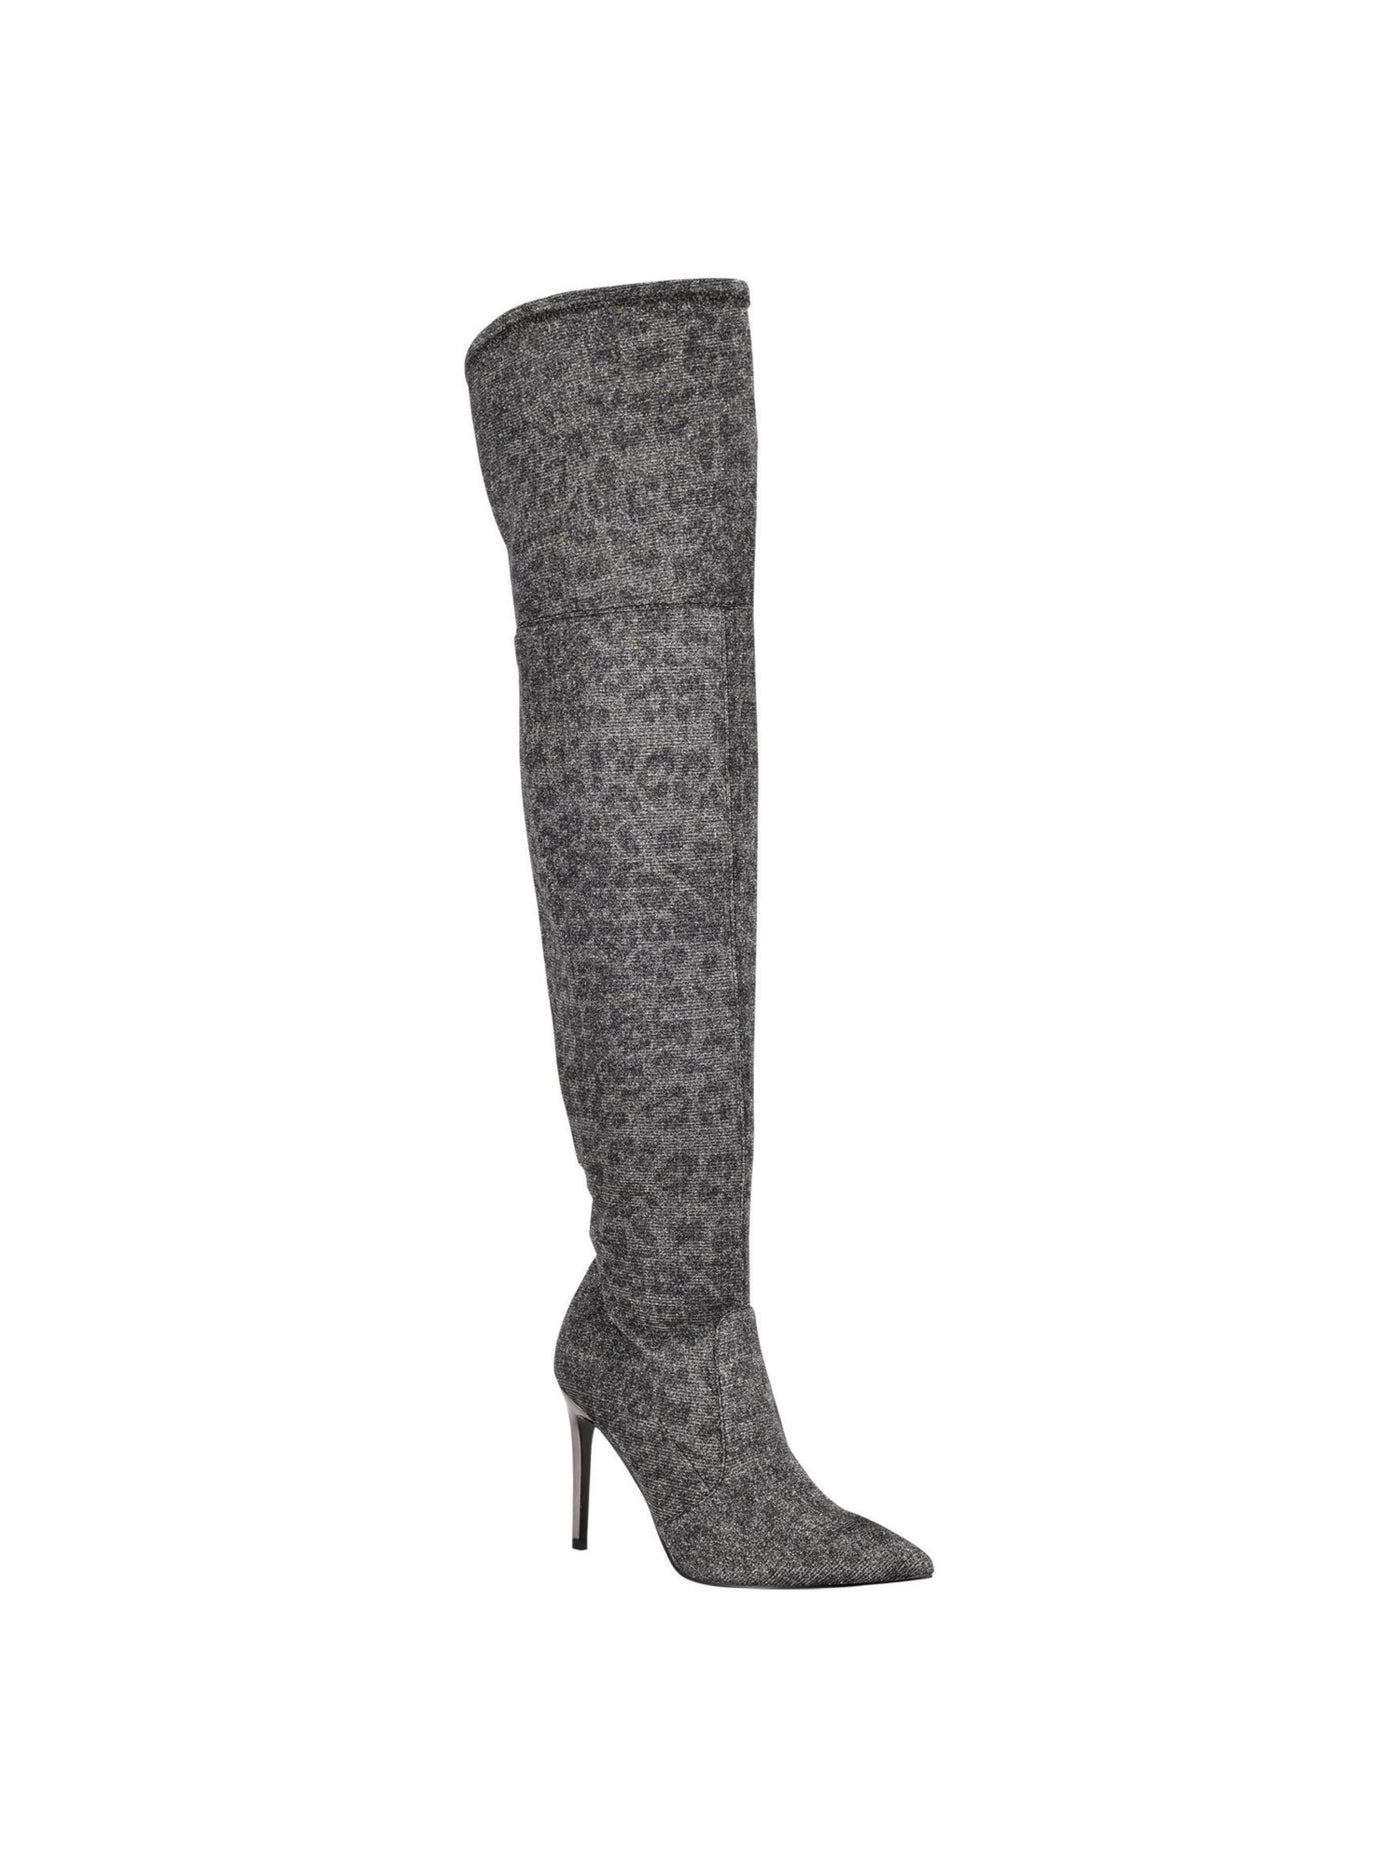 GUESS Womens Gray Stone Accent Bonis Pointy Toe Stiletto Zip-Up Dress Boots Shoes 6.5